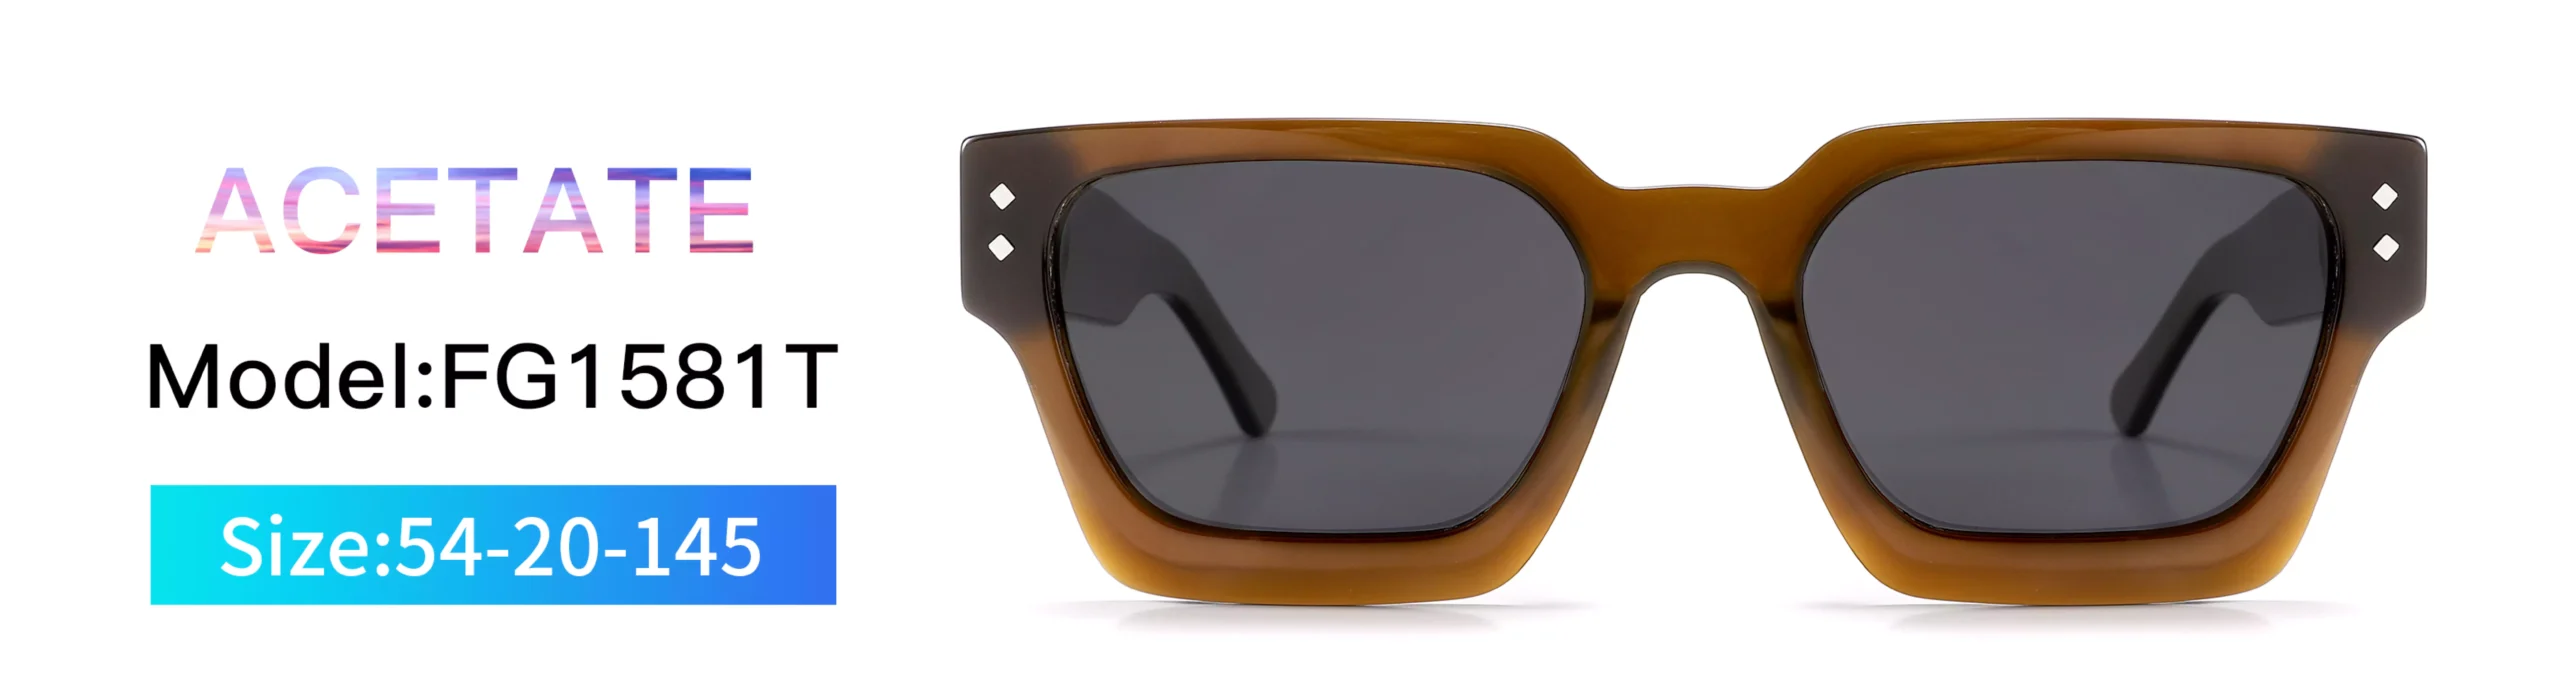 Sunglasses FG1581T, Size, Model, Acetate, Square, Front Display, Brown